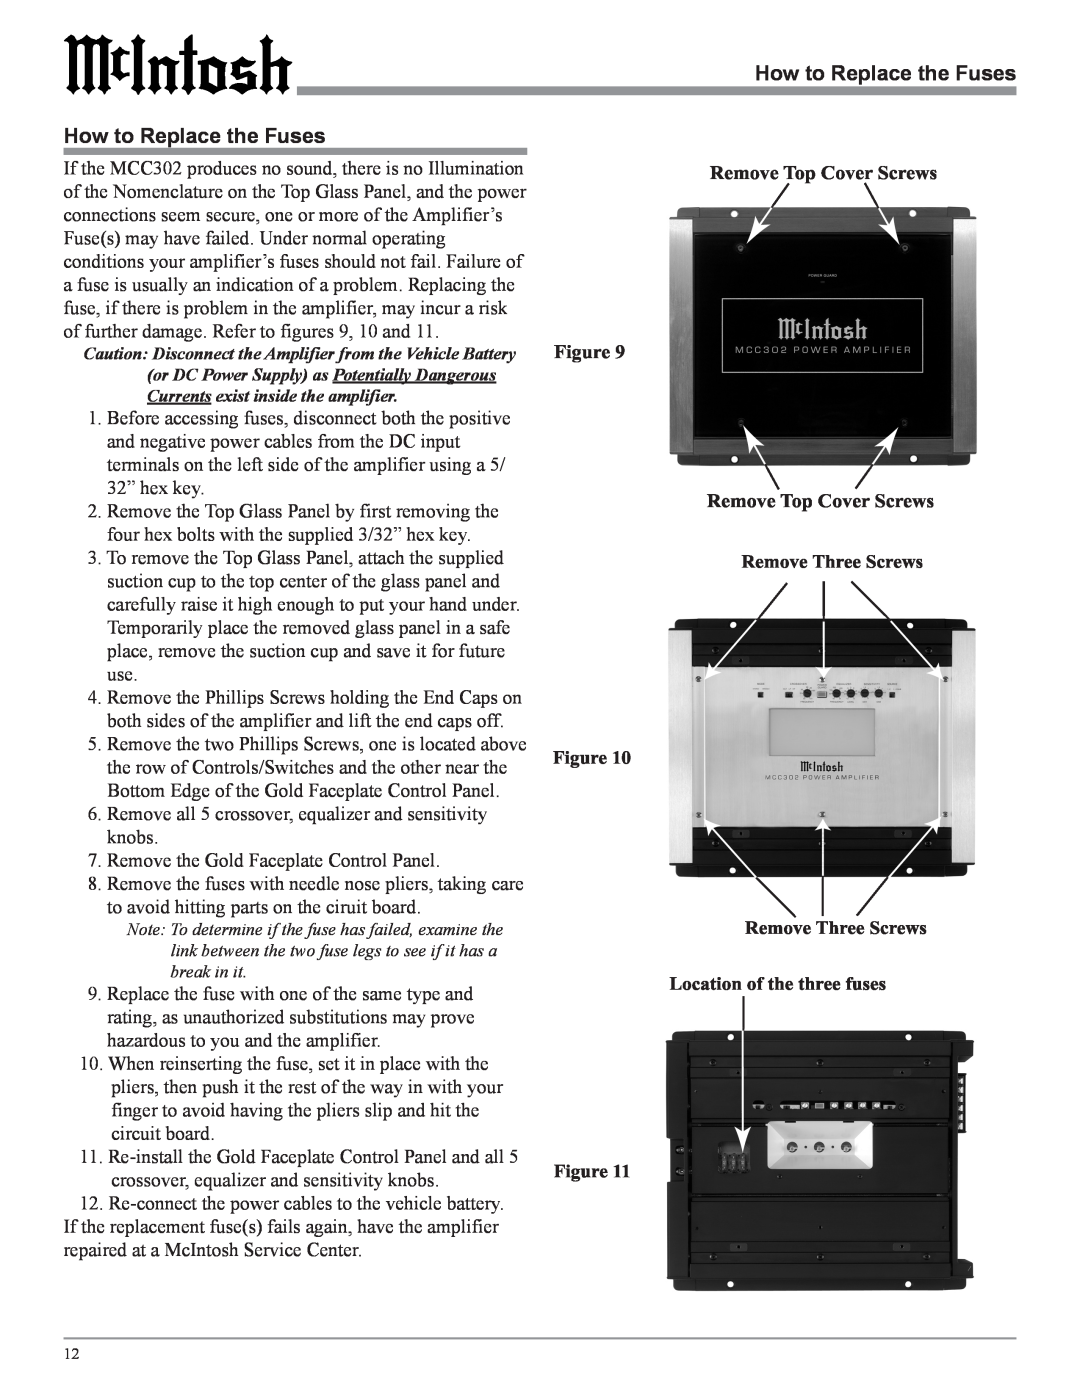 McIntosh MCC302M owner manual How to Replace the Fuses How to Replace the Fuses 